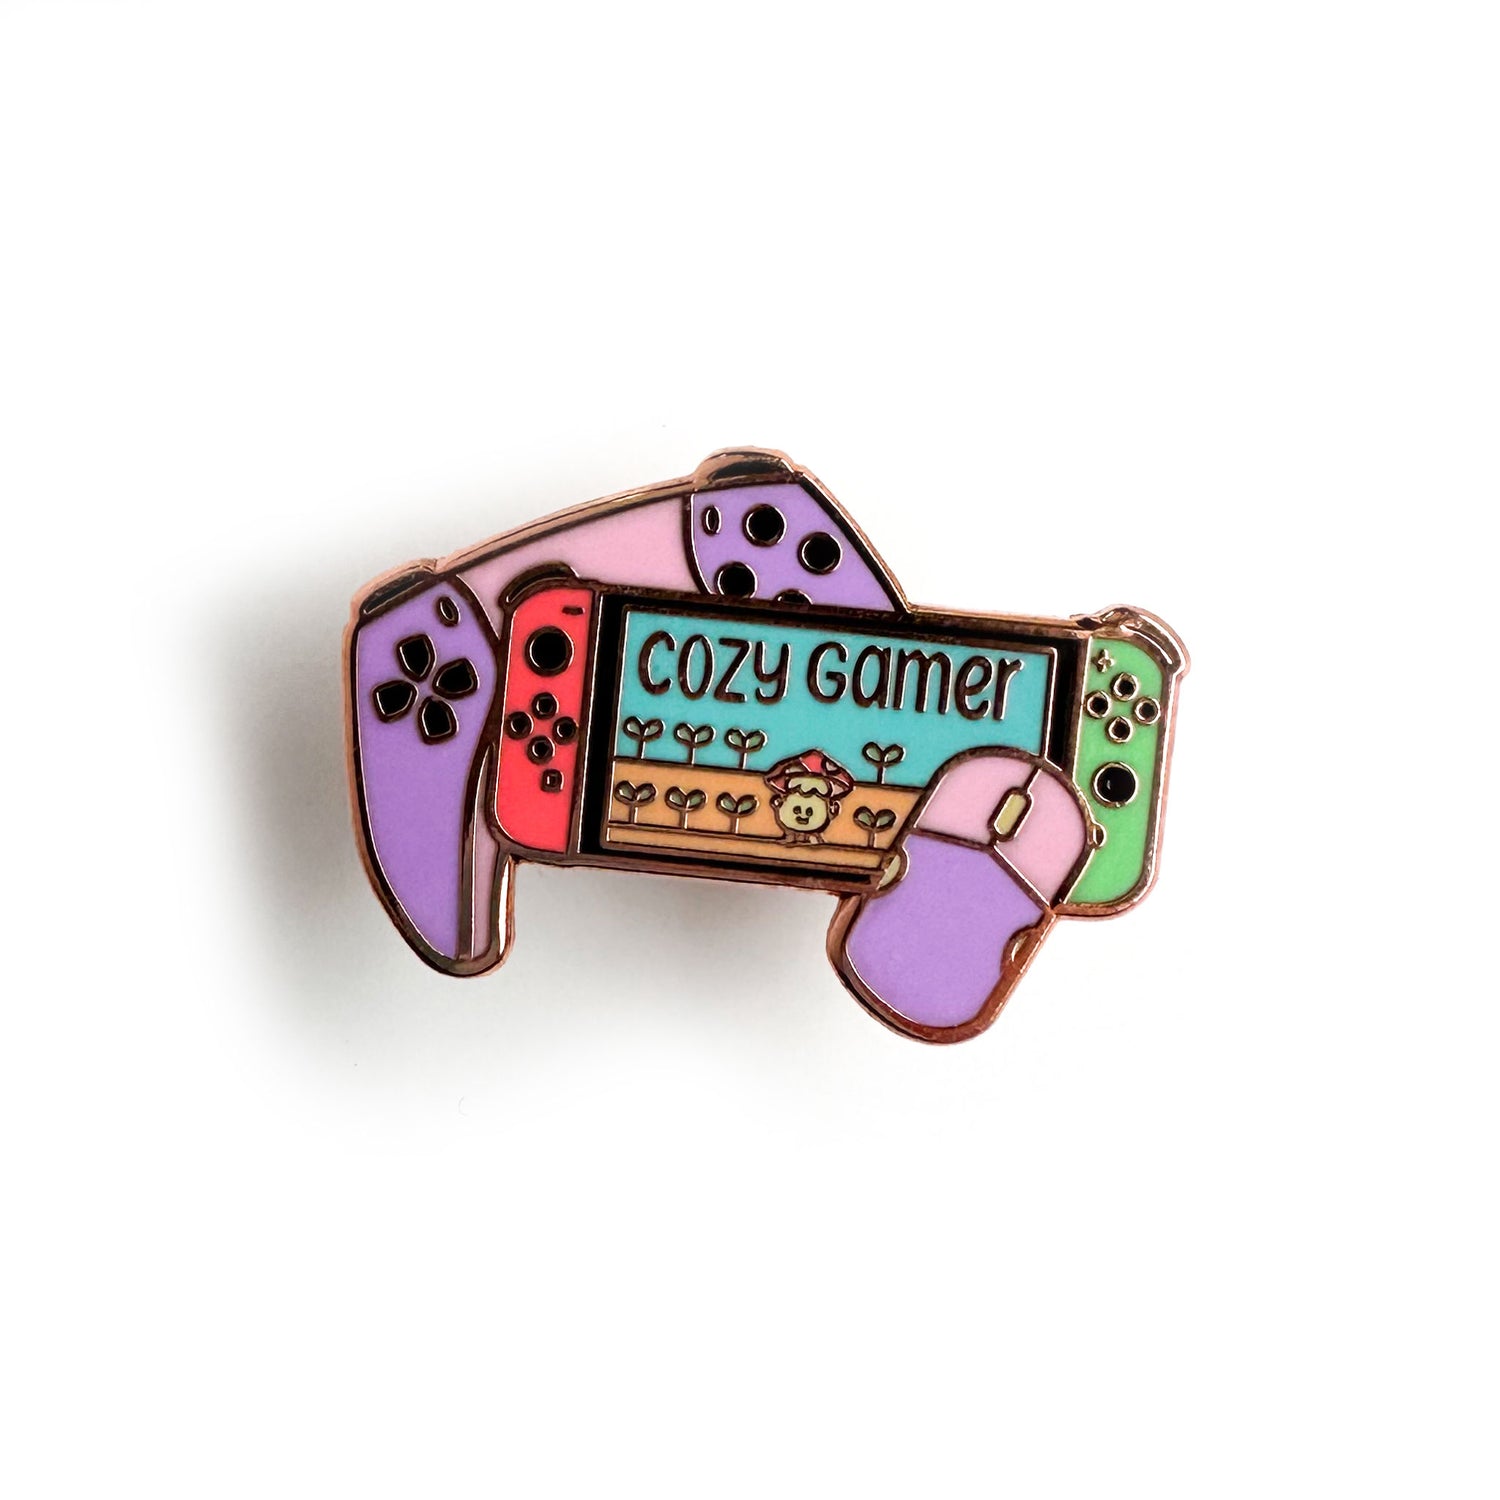 An enamel pin shaped like a Nintendo switch with a mouse and a game controller that has the words "Cozy Gamer" on the screen with a cute mushroom. 